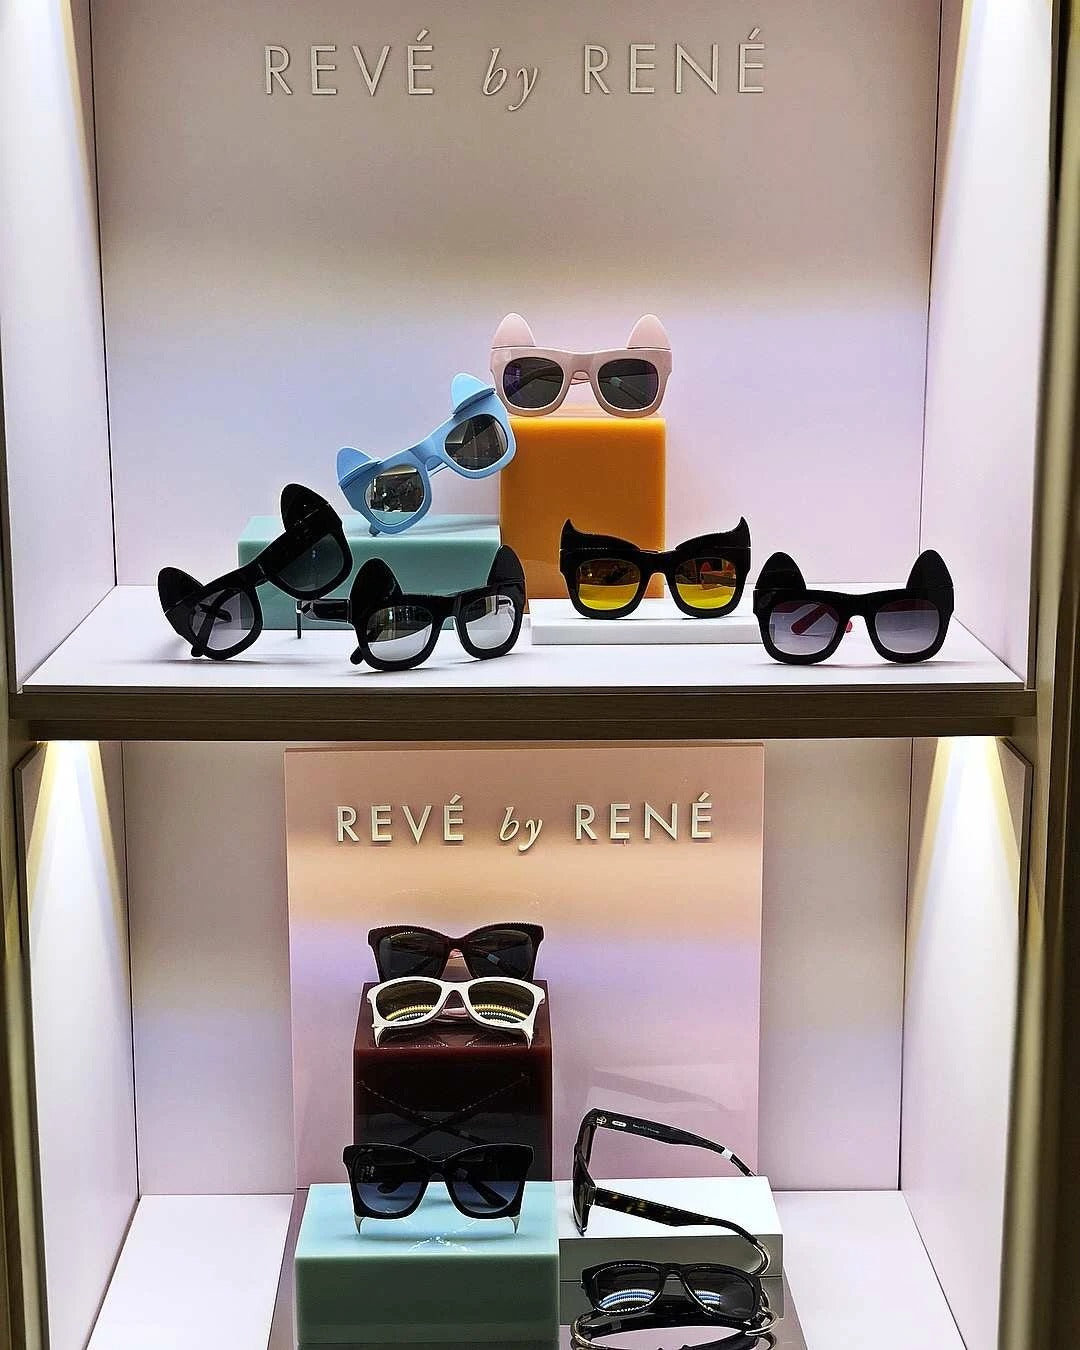 REVE by RENE puyi Beijing event